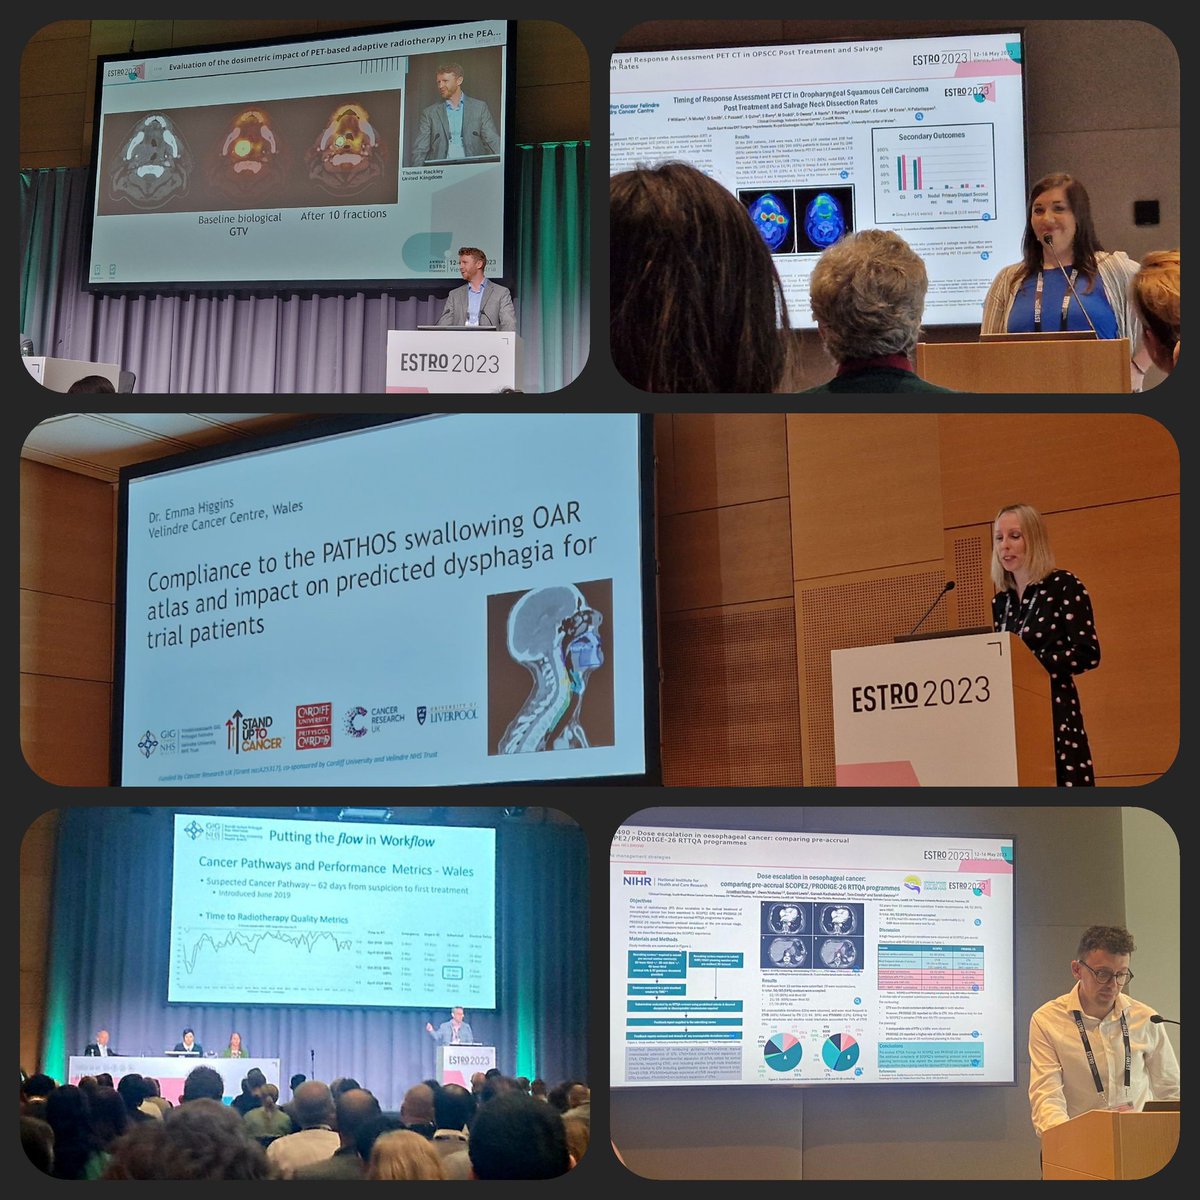 Fantastic Welsh contribution from @SWWCancerCentre @VelindreCC trainees fellows & consultants to inspirational #ESTRO2023 in vibrant Vienna. Weather brightening up now too for @mereride talk this pm! @emma_higgins1 @Tomrackley @fionawilliams16 @tomcrosby12 @RTTQA_UK @tomroques